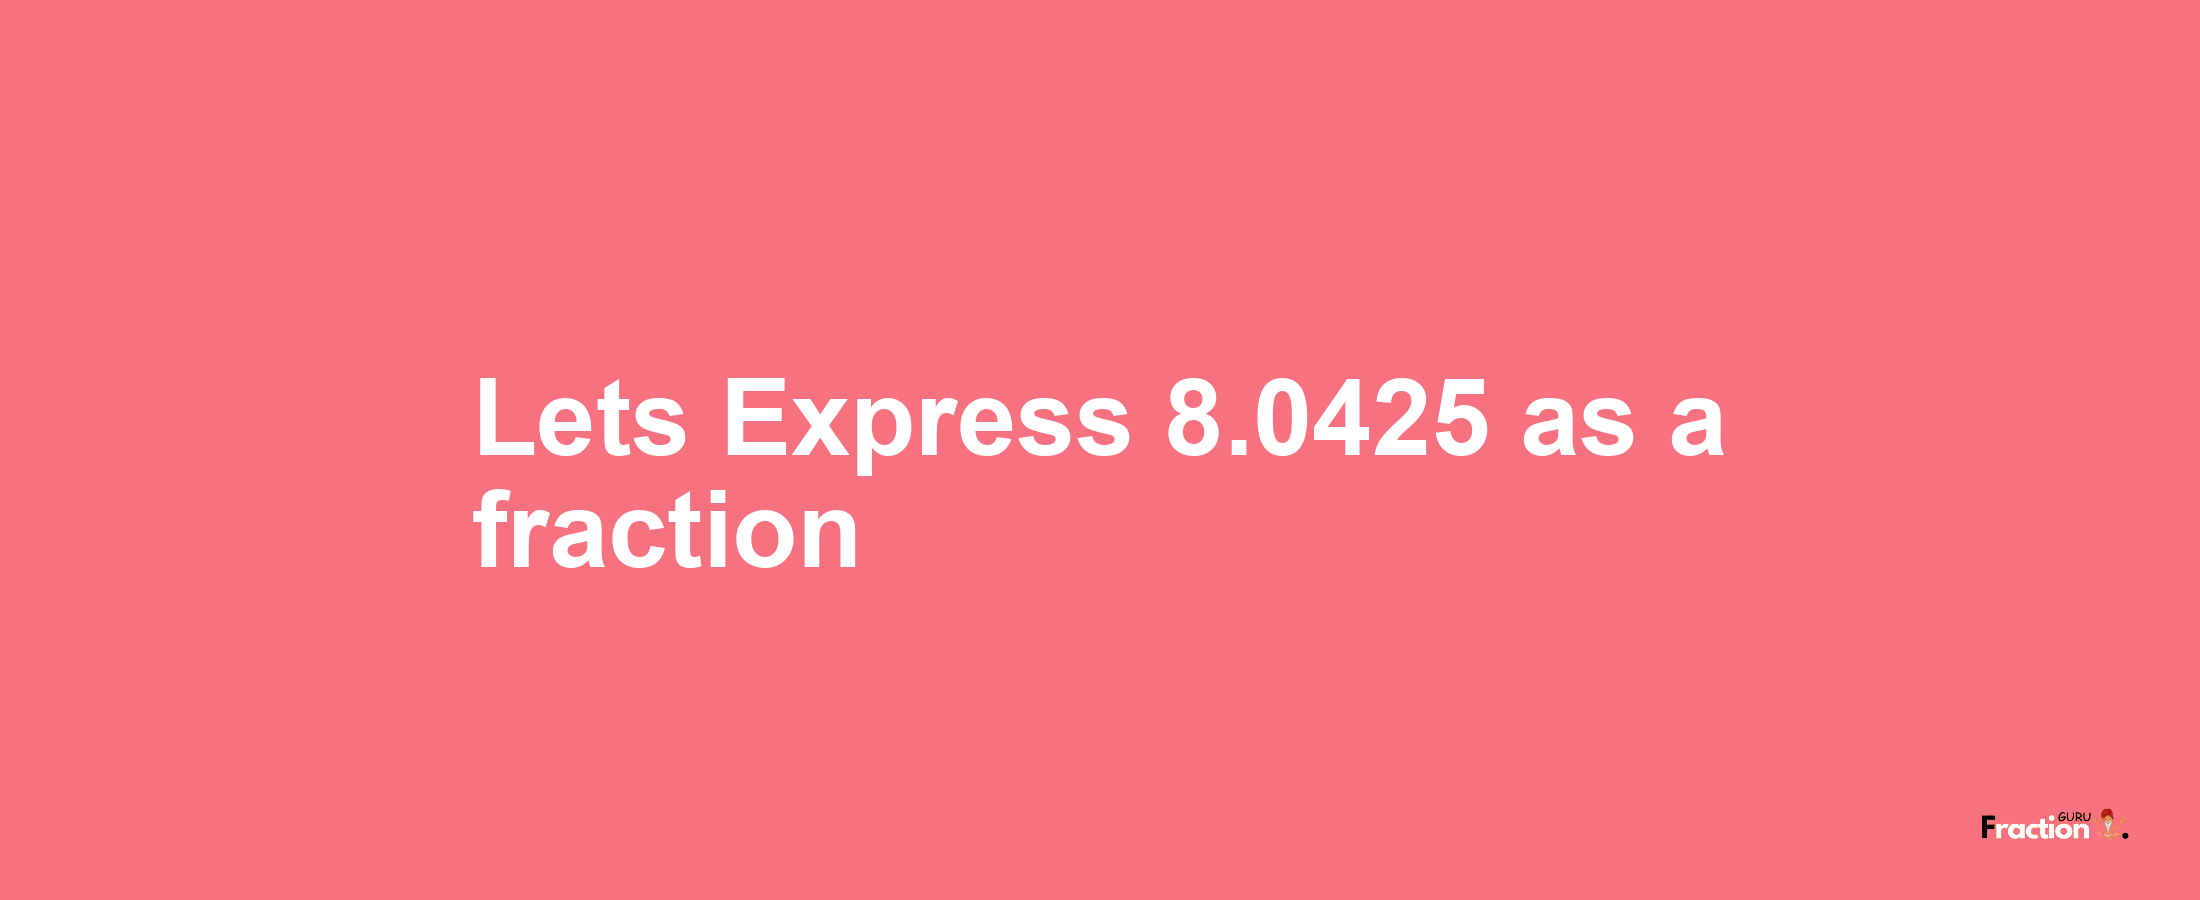 Lets Express 8.0425 as afraction